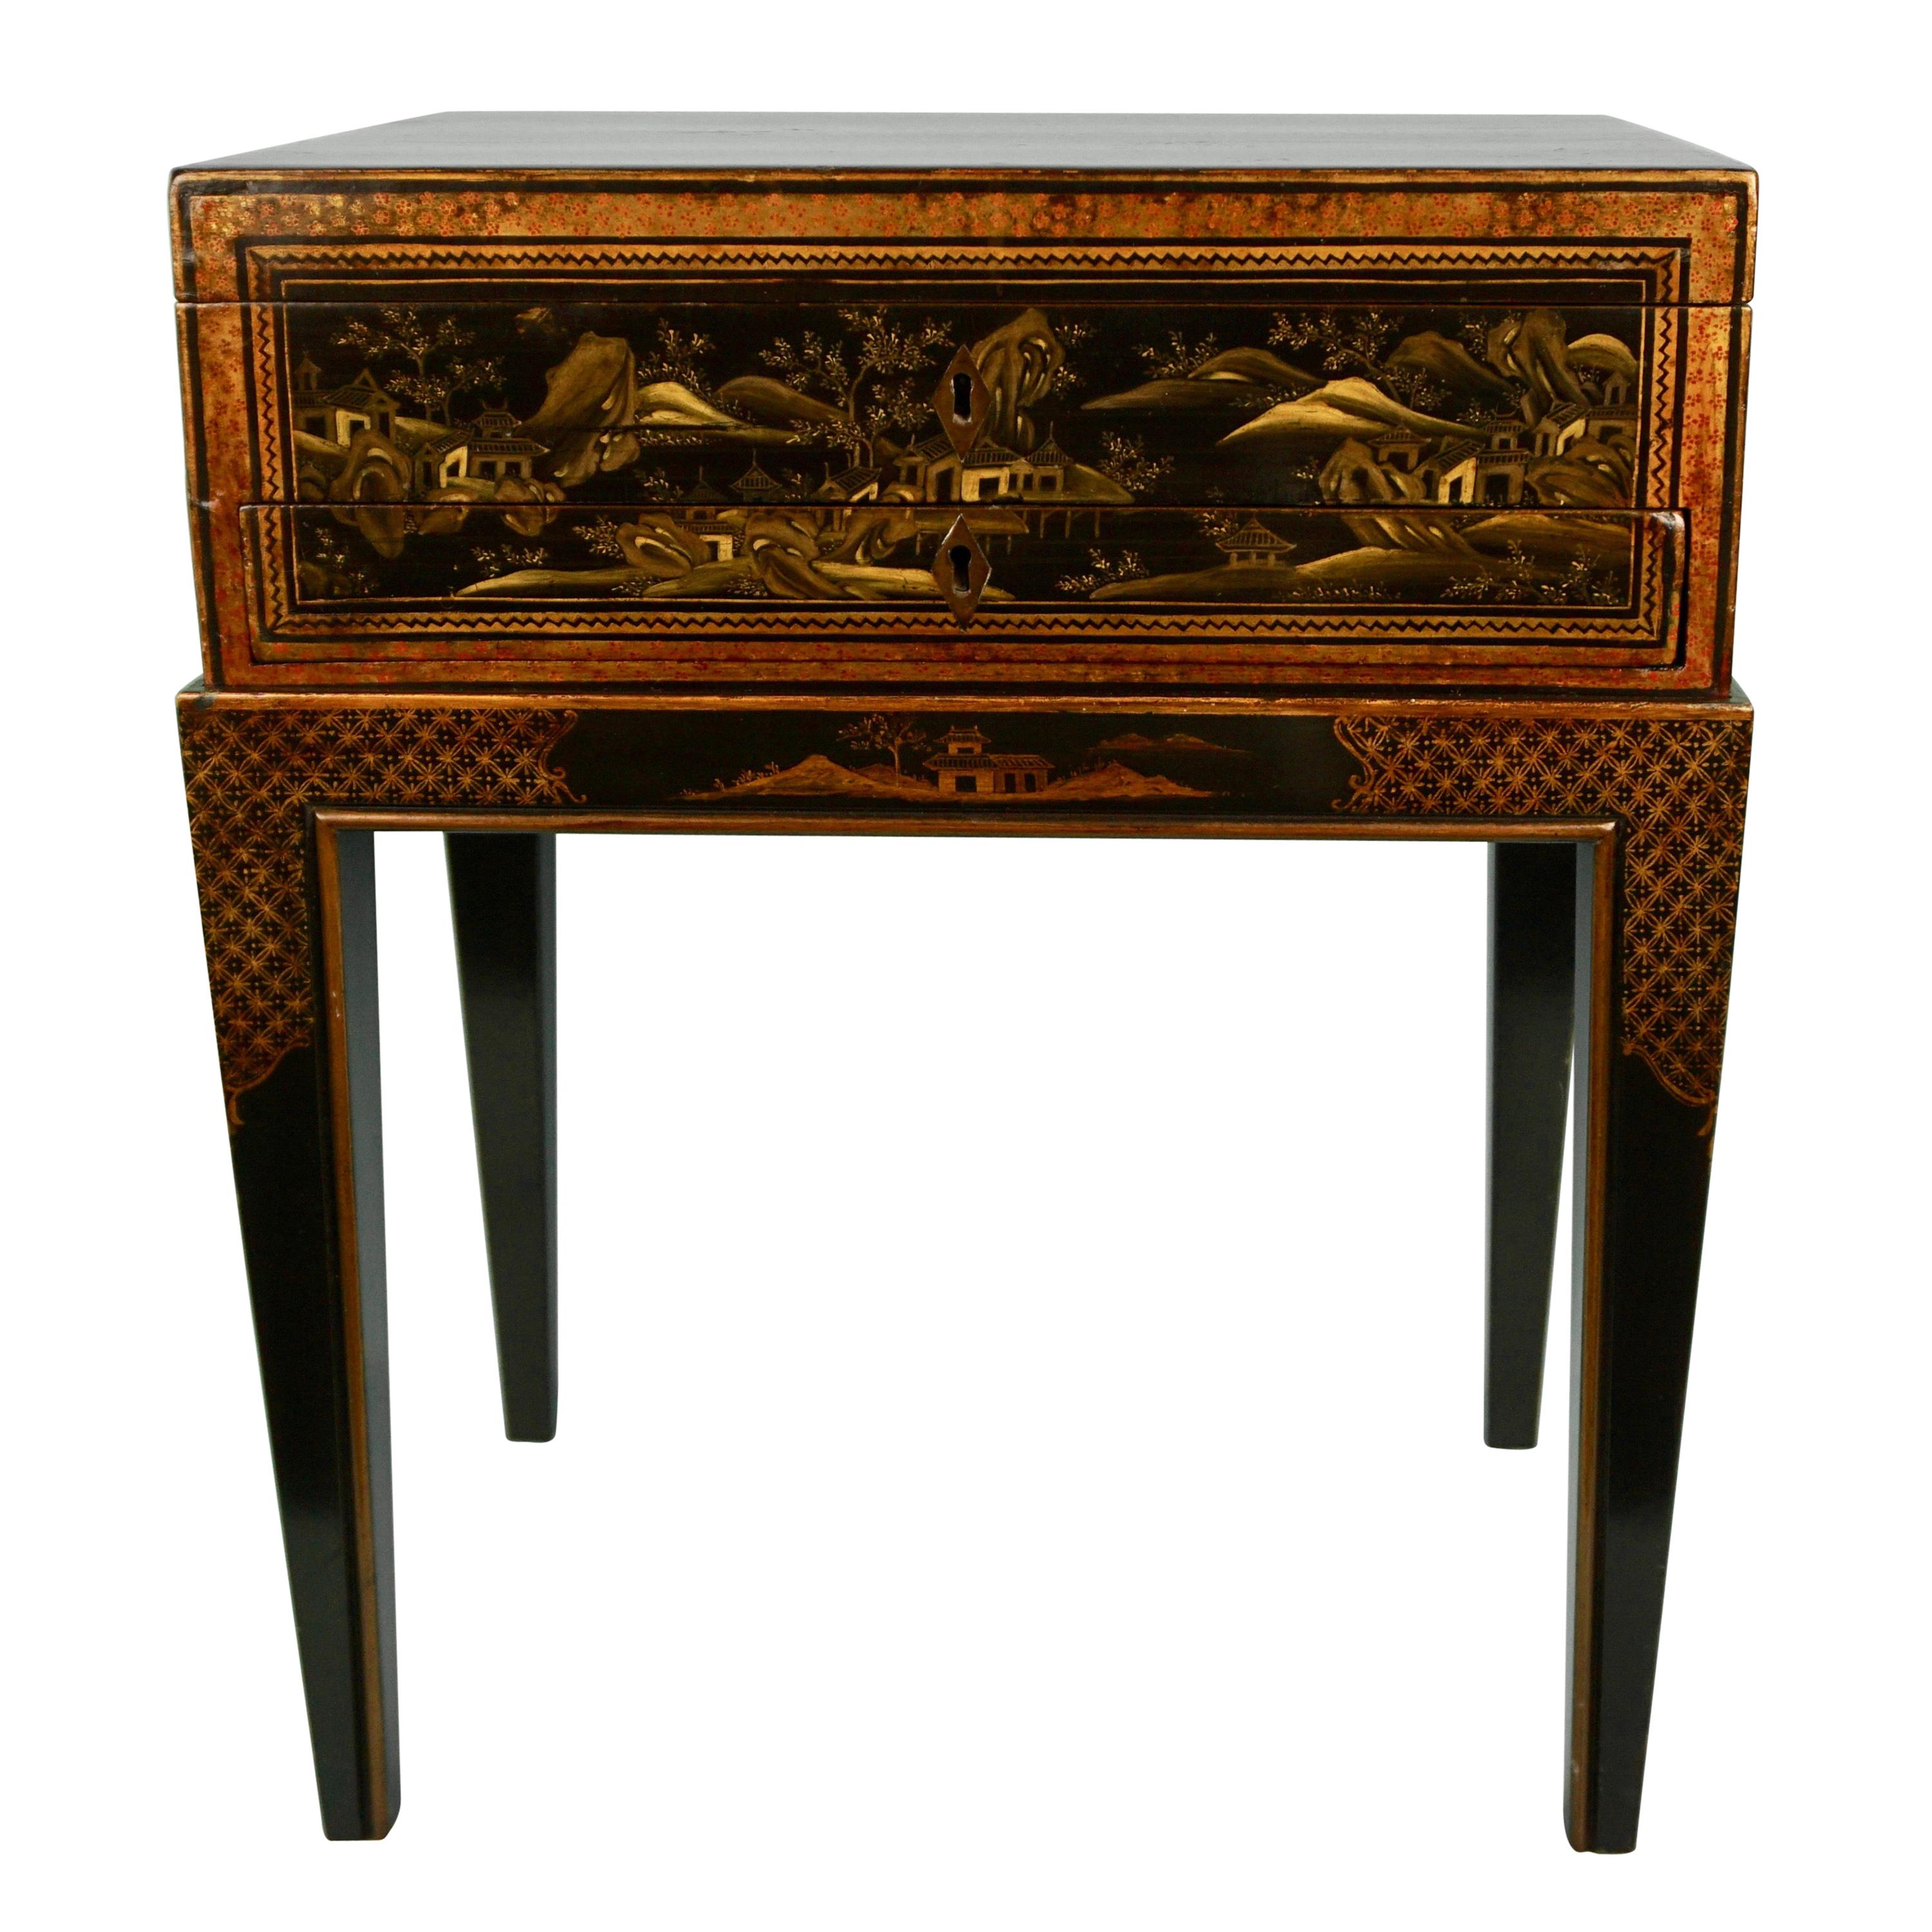 Chinese Export Black Lacquer Writing or Work Box on Later Custom Stand